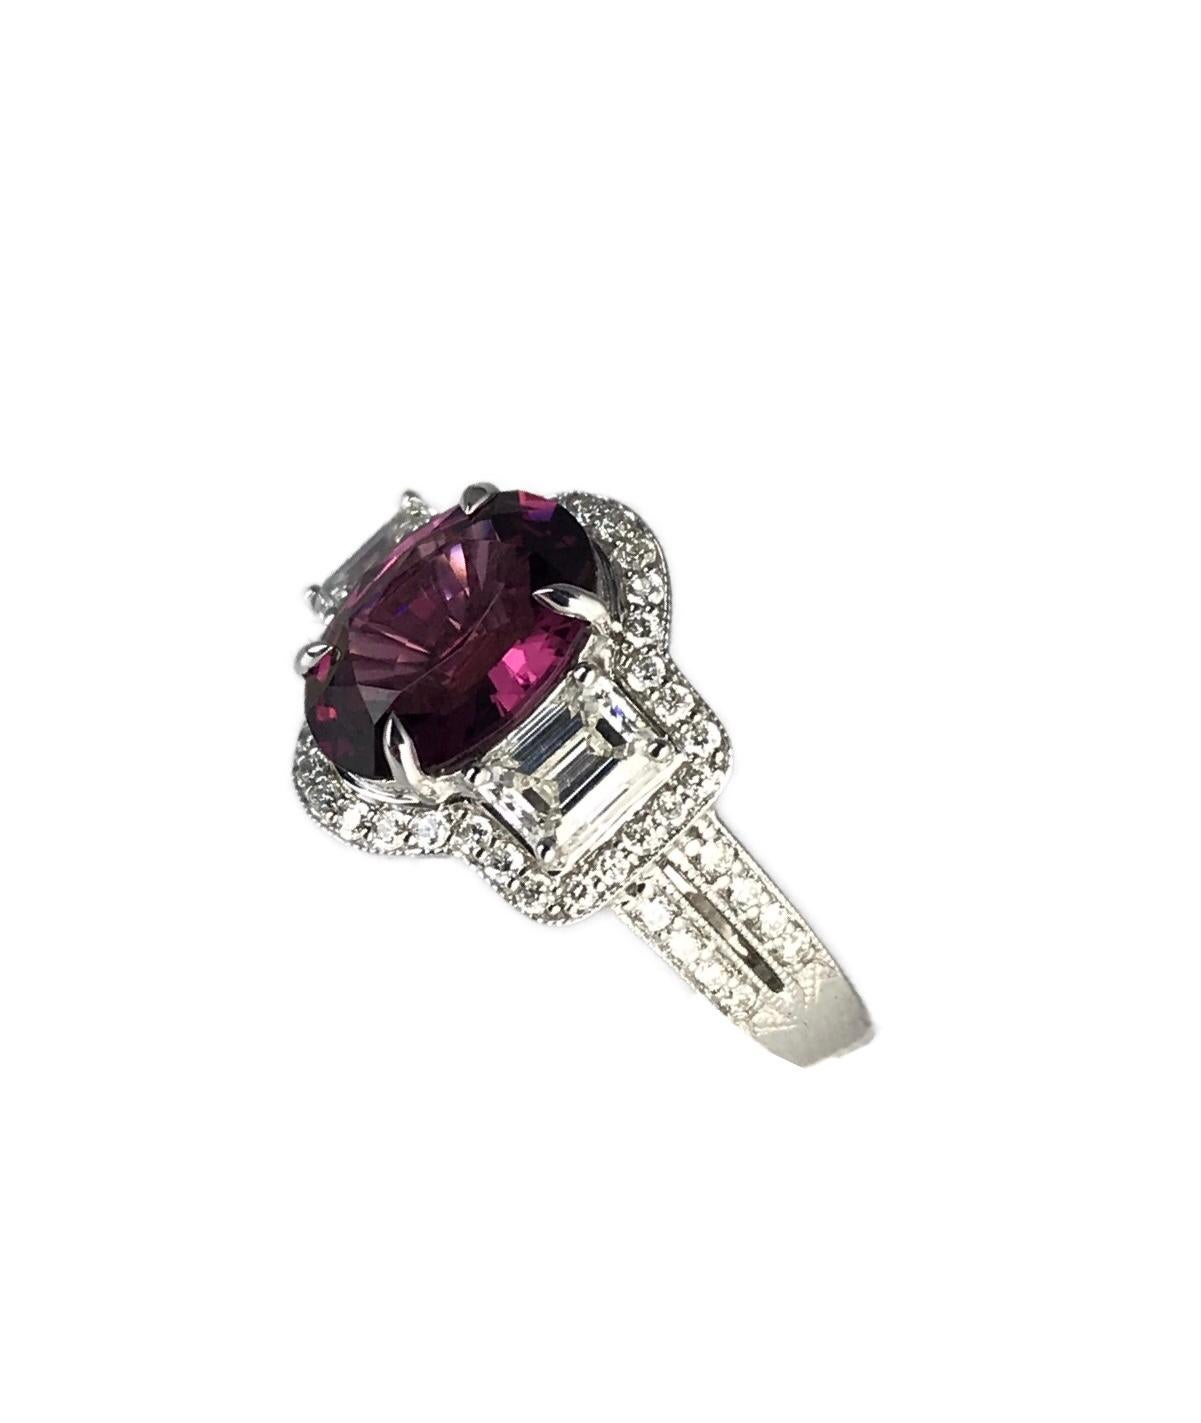 This exquisite ring, features a captivating 2.84 carat oval cut raspberry garnet at its heart. This rich, velvety gemstone is complemented by two elegantly tapered baguettes on either side, adding a touch of sophistication to the design. Surrounding